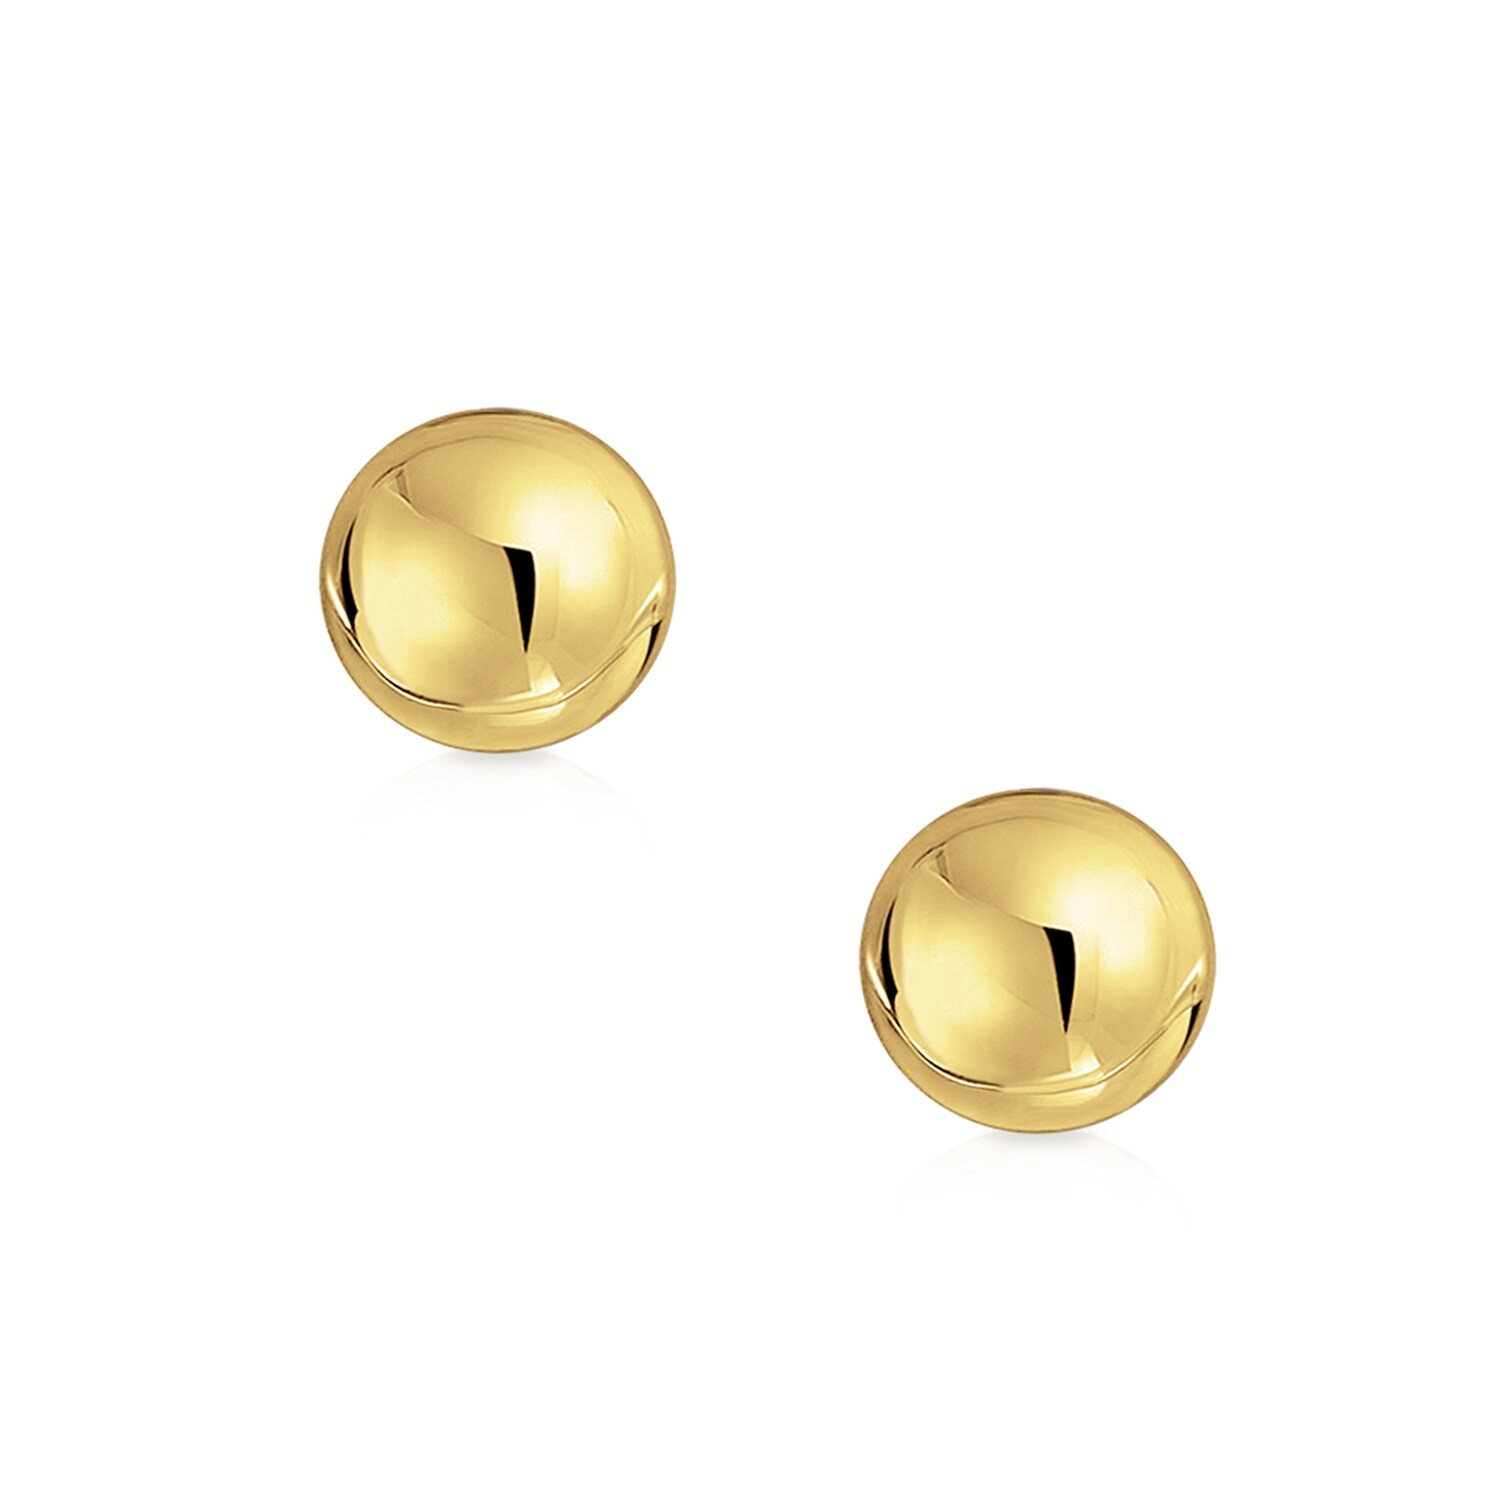 Simple Basic Hollow Round Ball Stud Earrings For Women Real 14K Yellow Gold 7MM Bling Jewelry SSTR-E12-7mm 